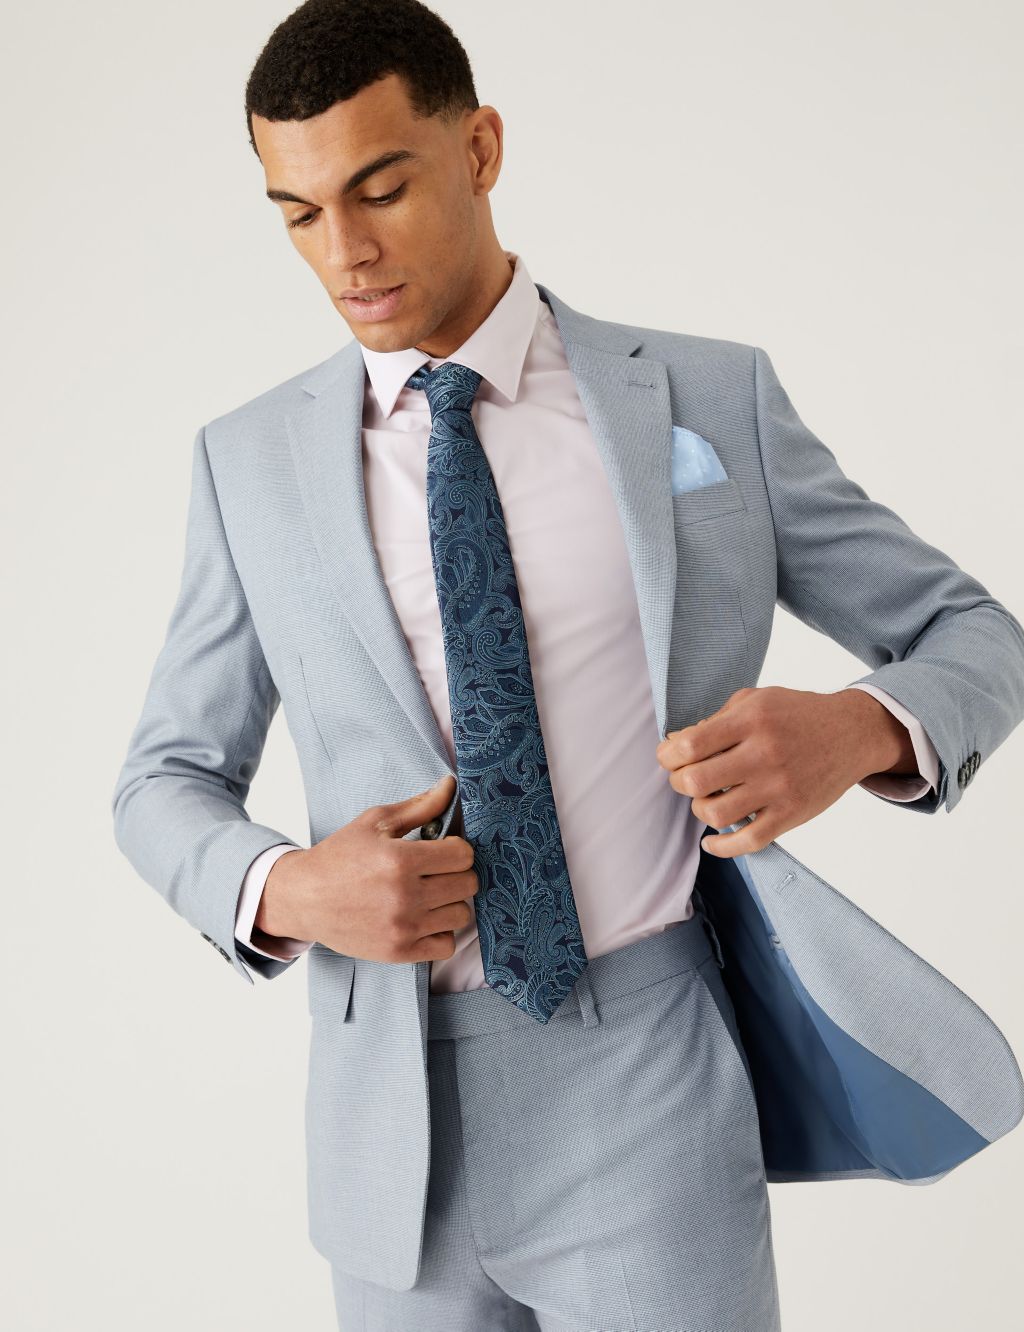 Slim Fit Puppytooth Suit image 2